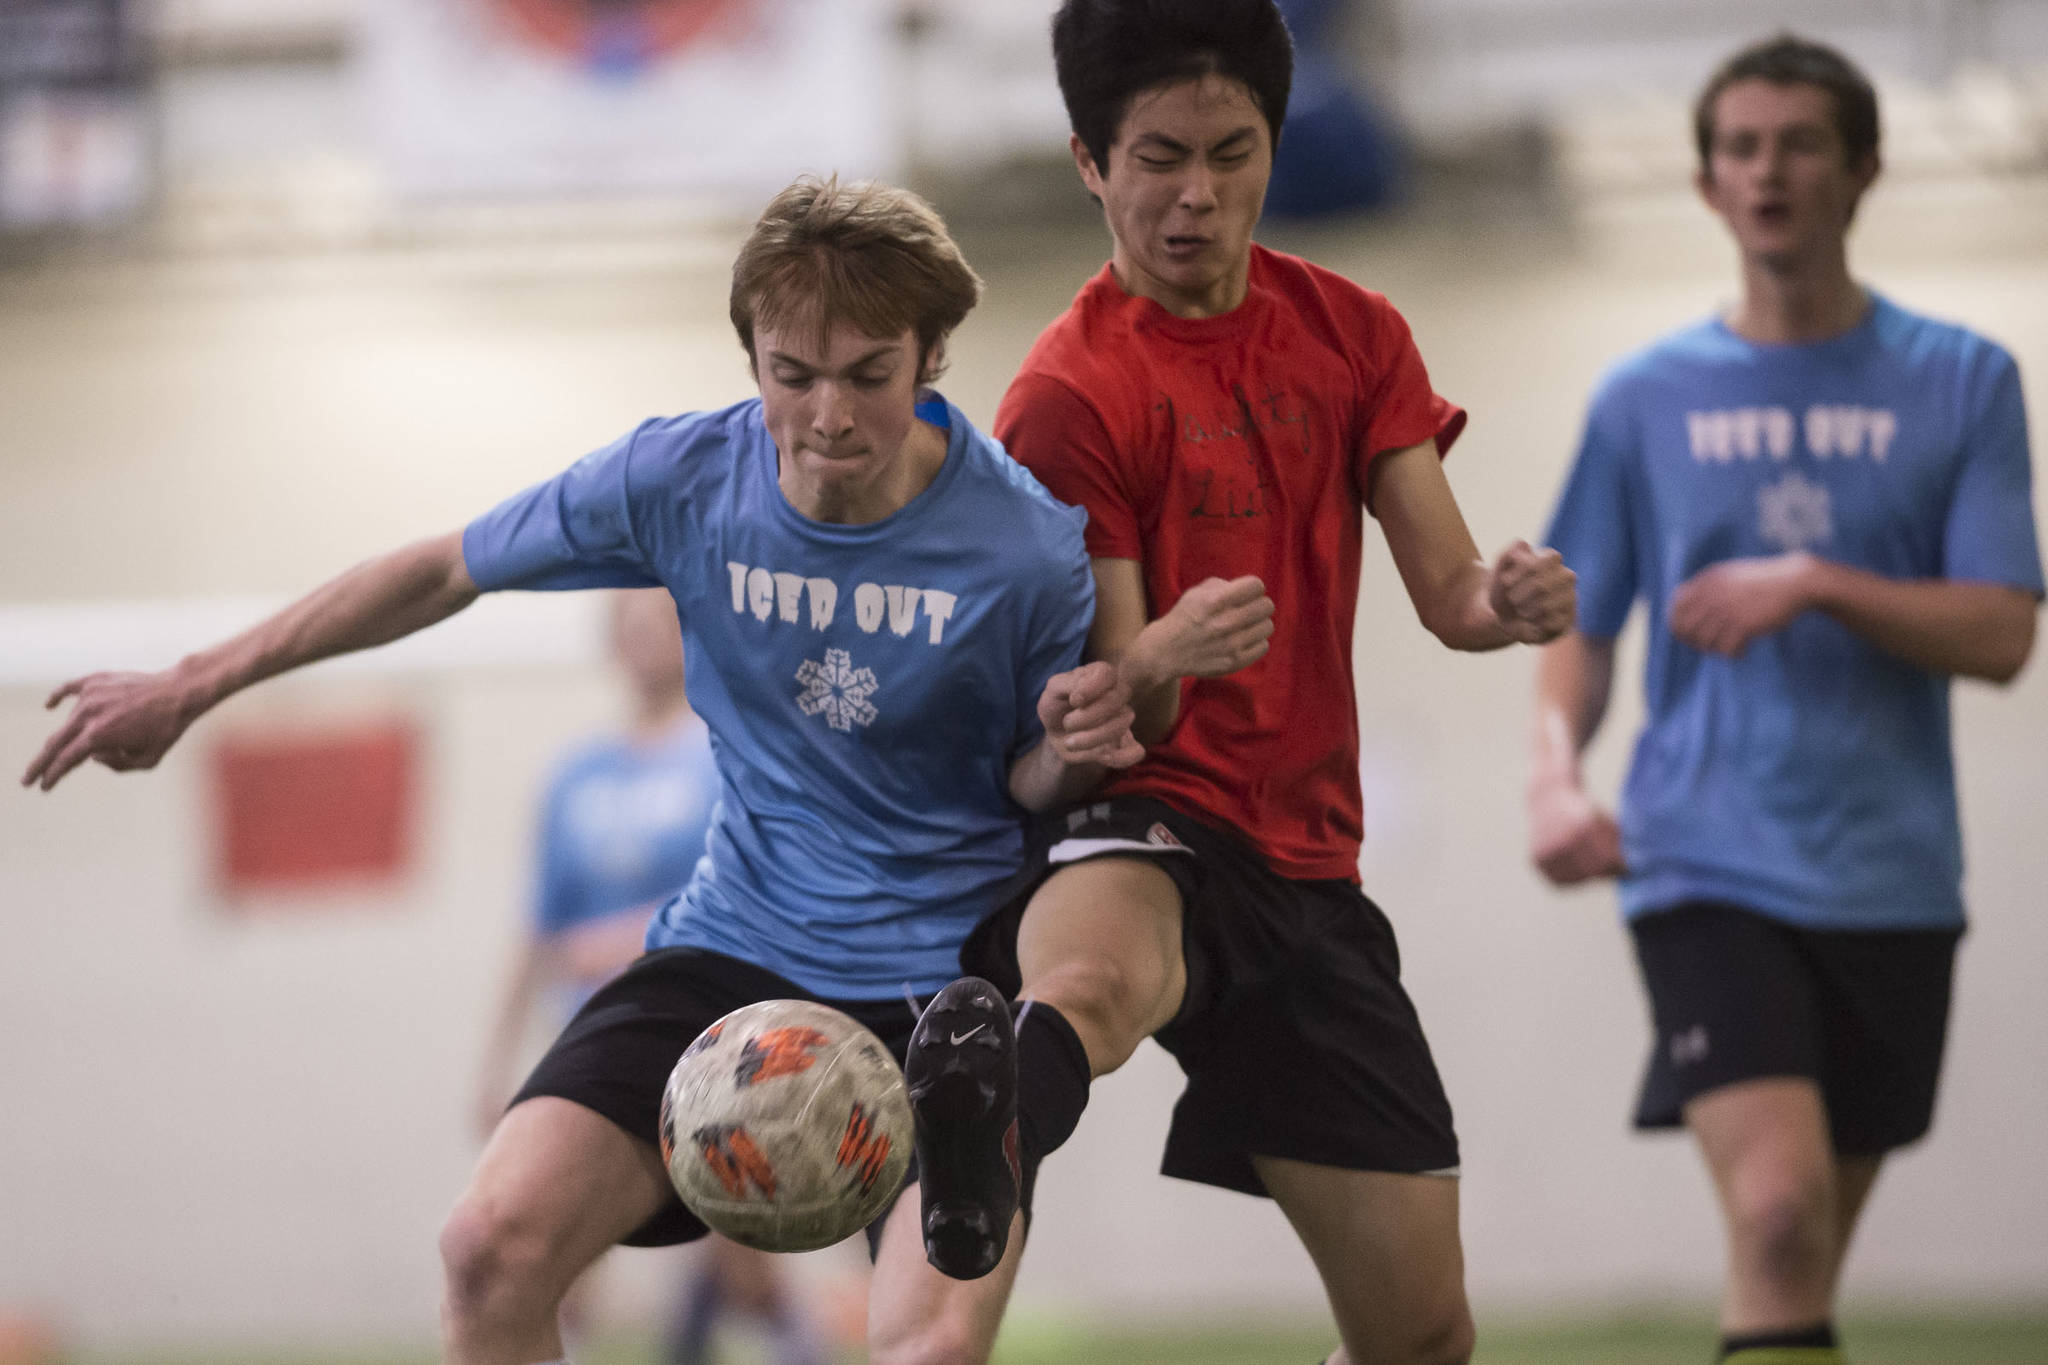 Photos: Holiday Cup Soccer Tournament finals